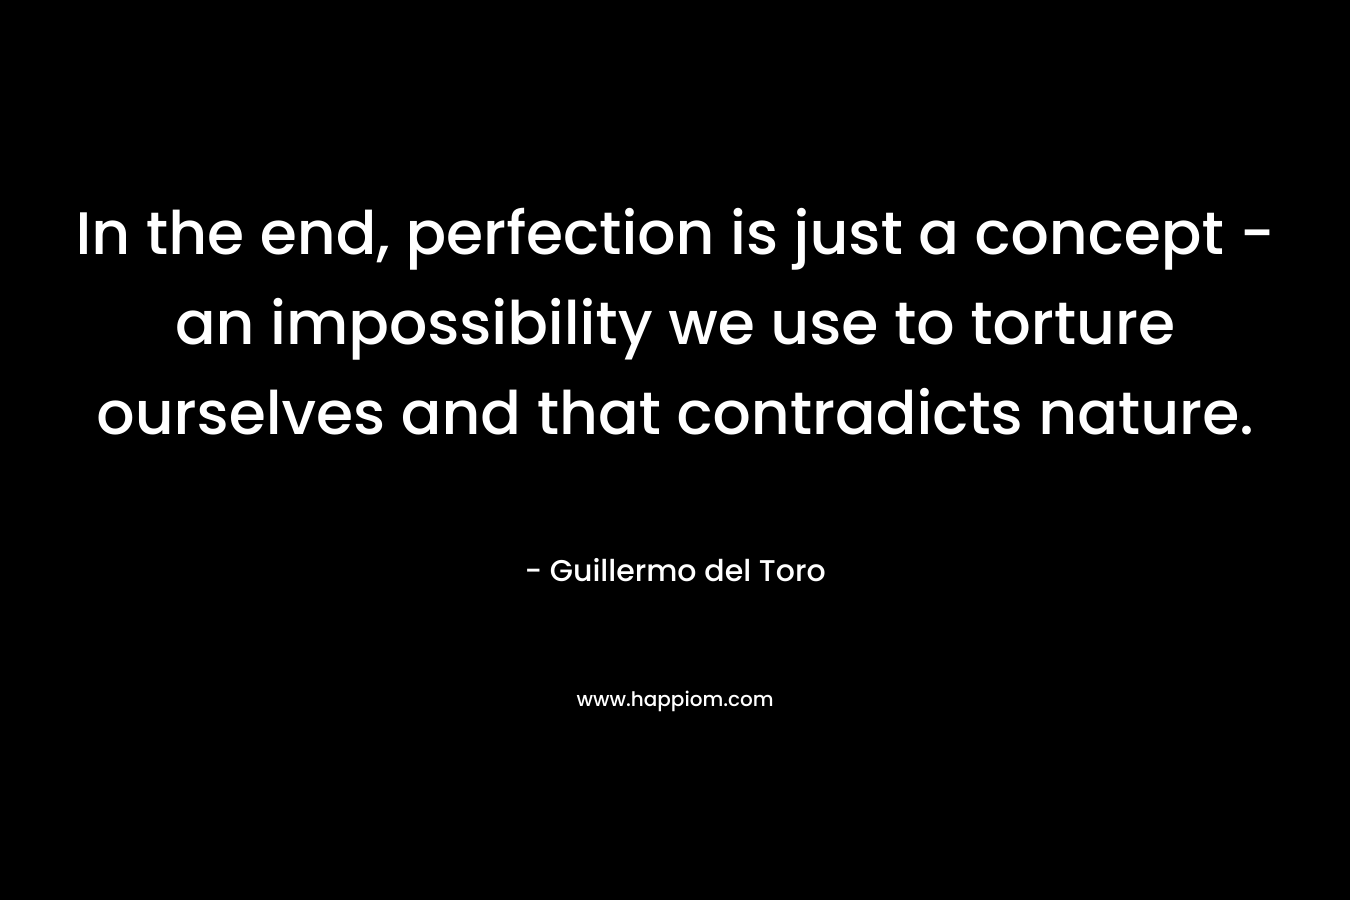 In the end, perfection is just a concept - an impossibility we use to torture ourselves and that contradicts nature.